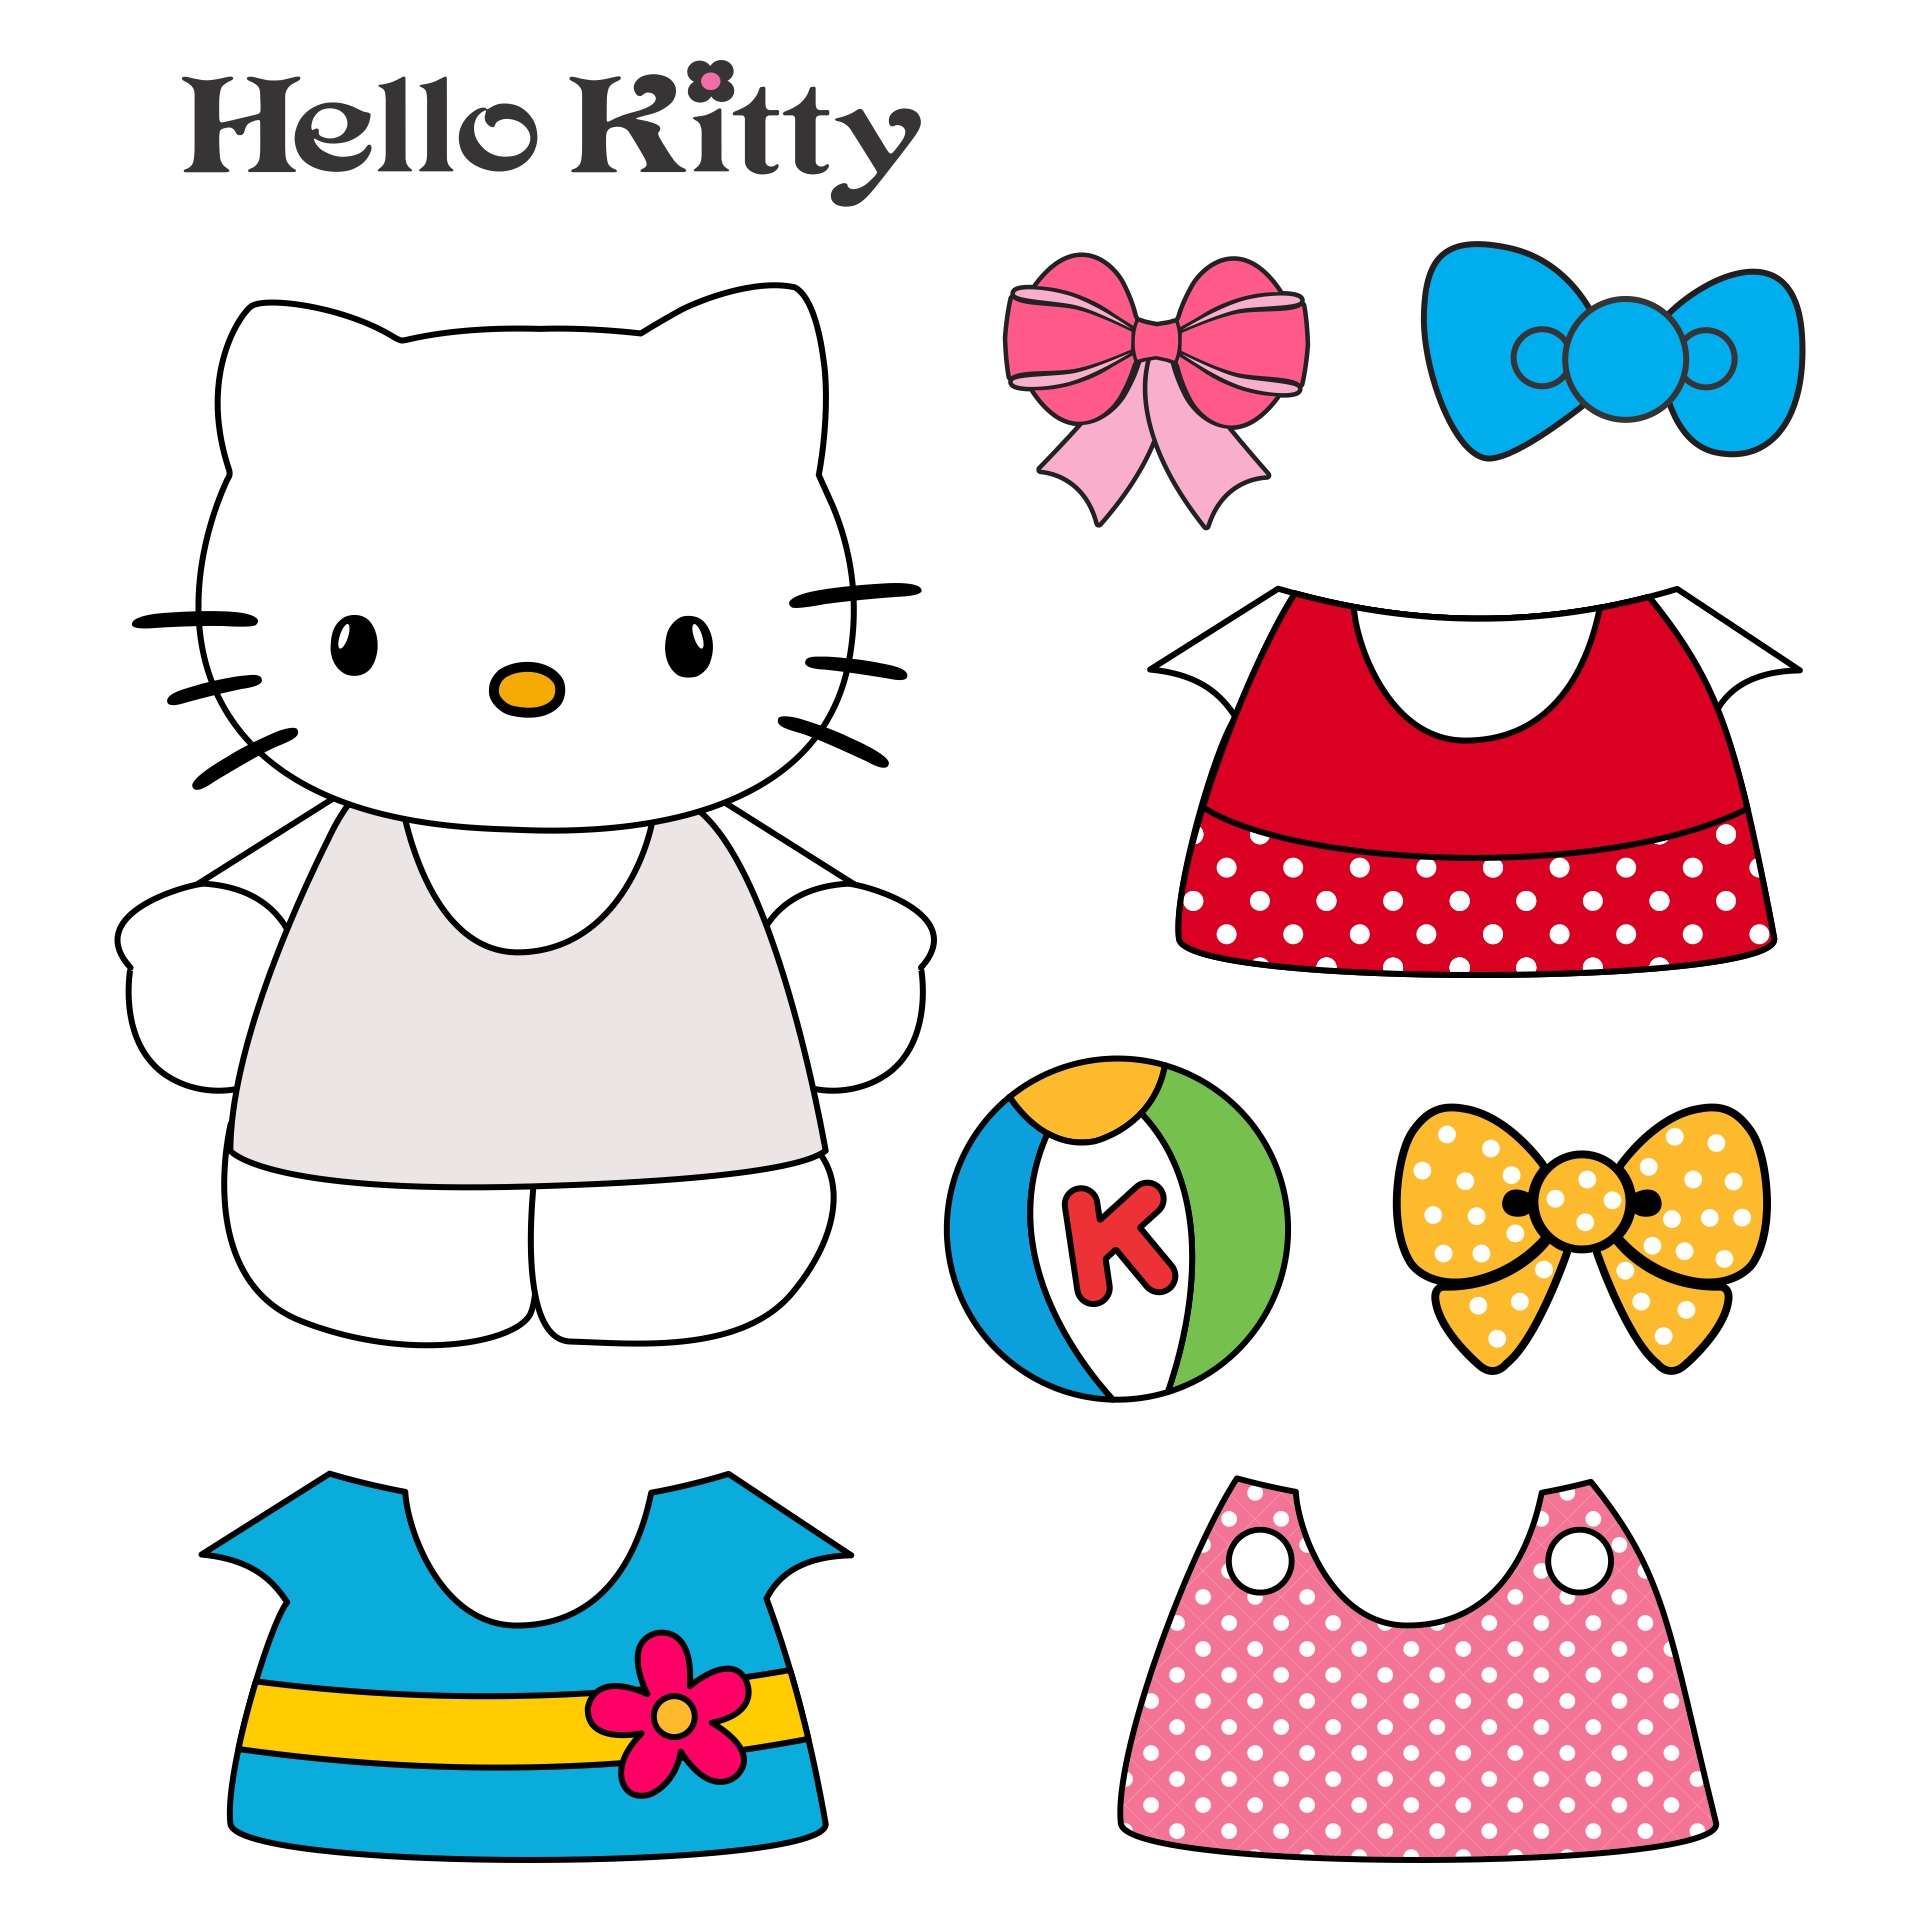 Hello Kitty Party Printable Paper Dolls